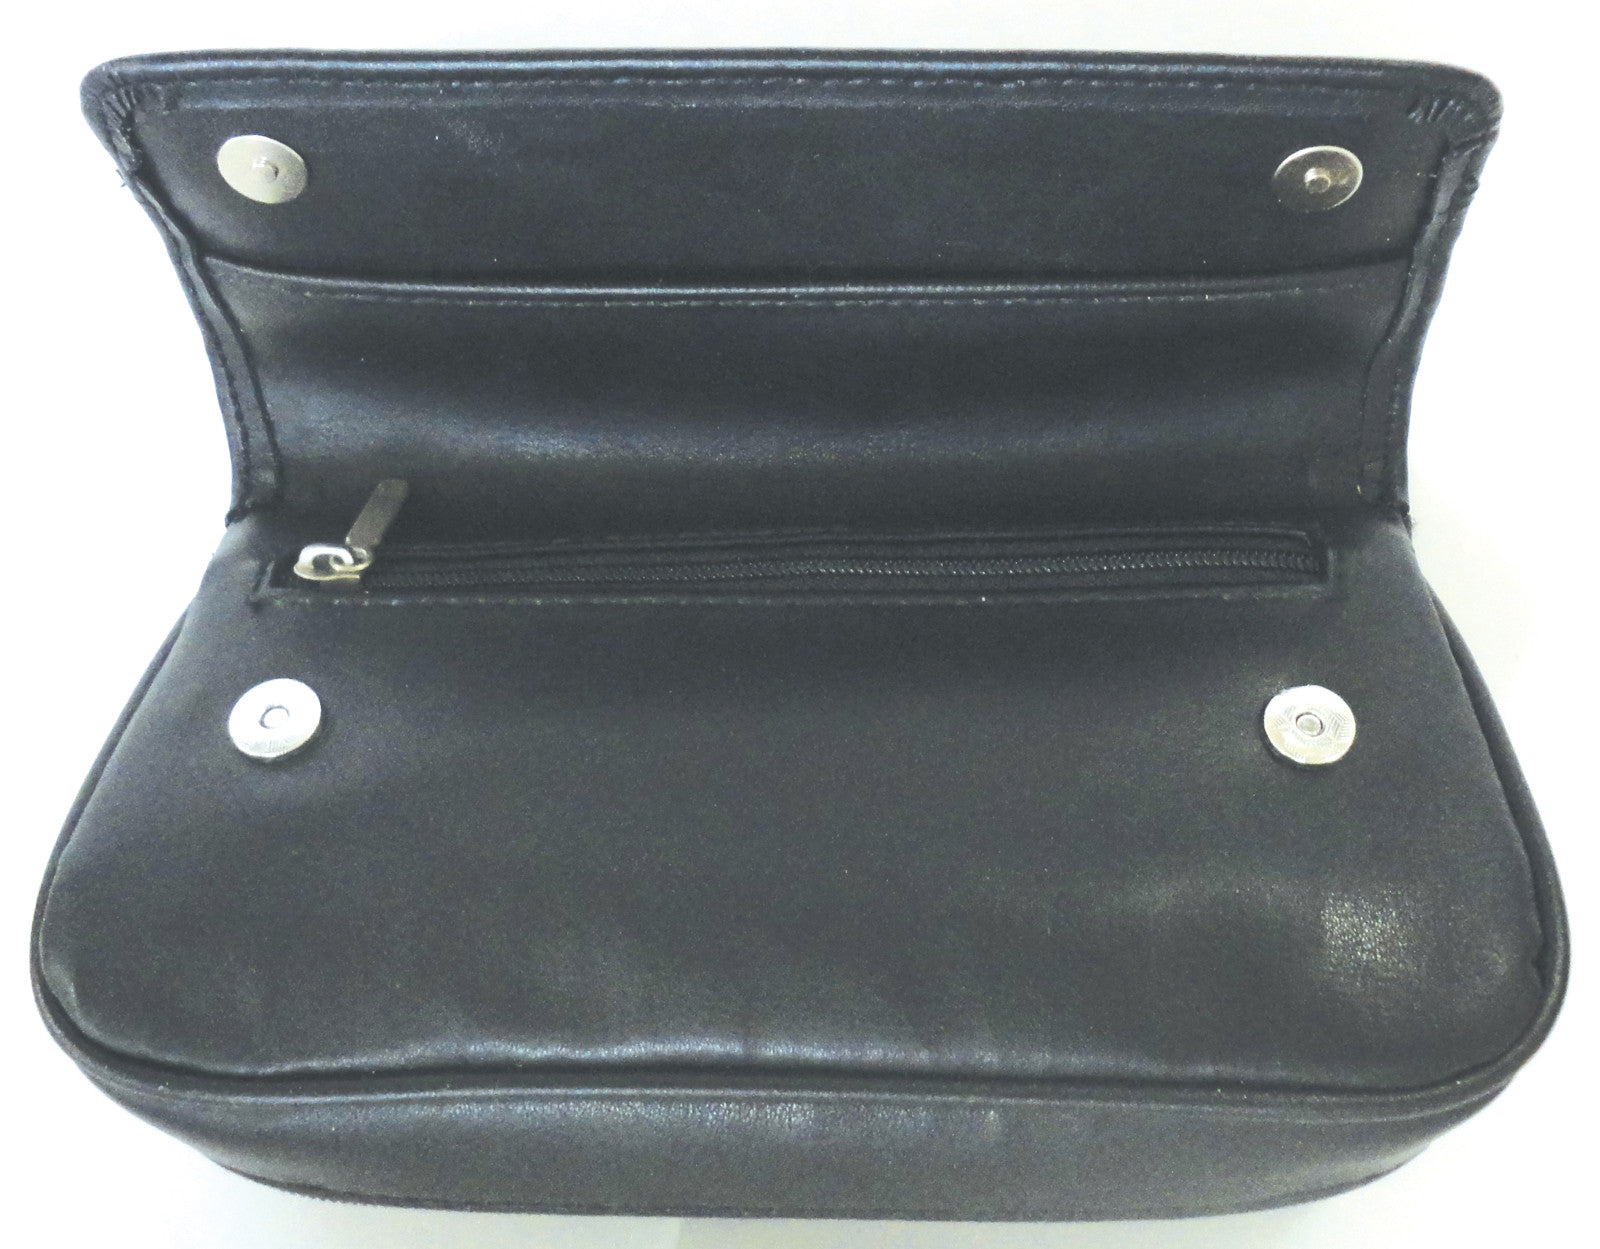 BigBen genuine leather pouch for 2 pipes & tobacco combination 743.221.210